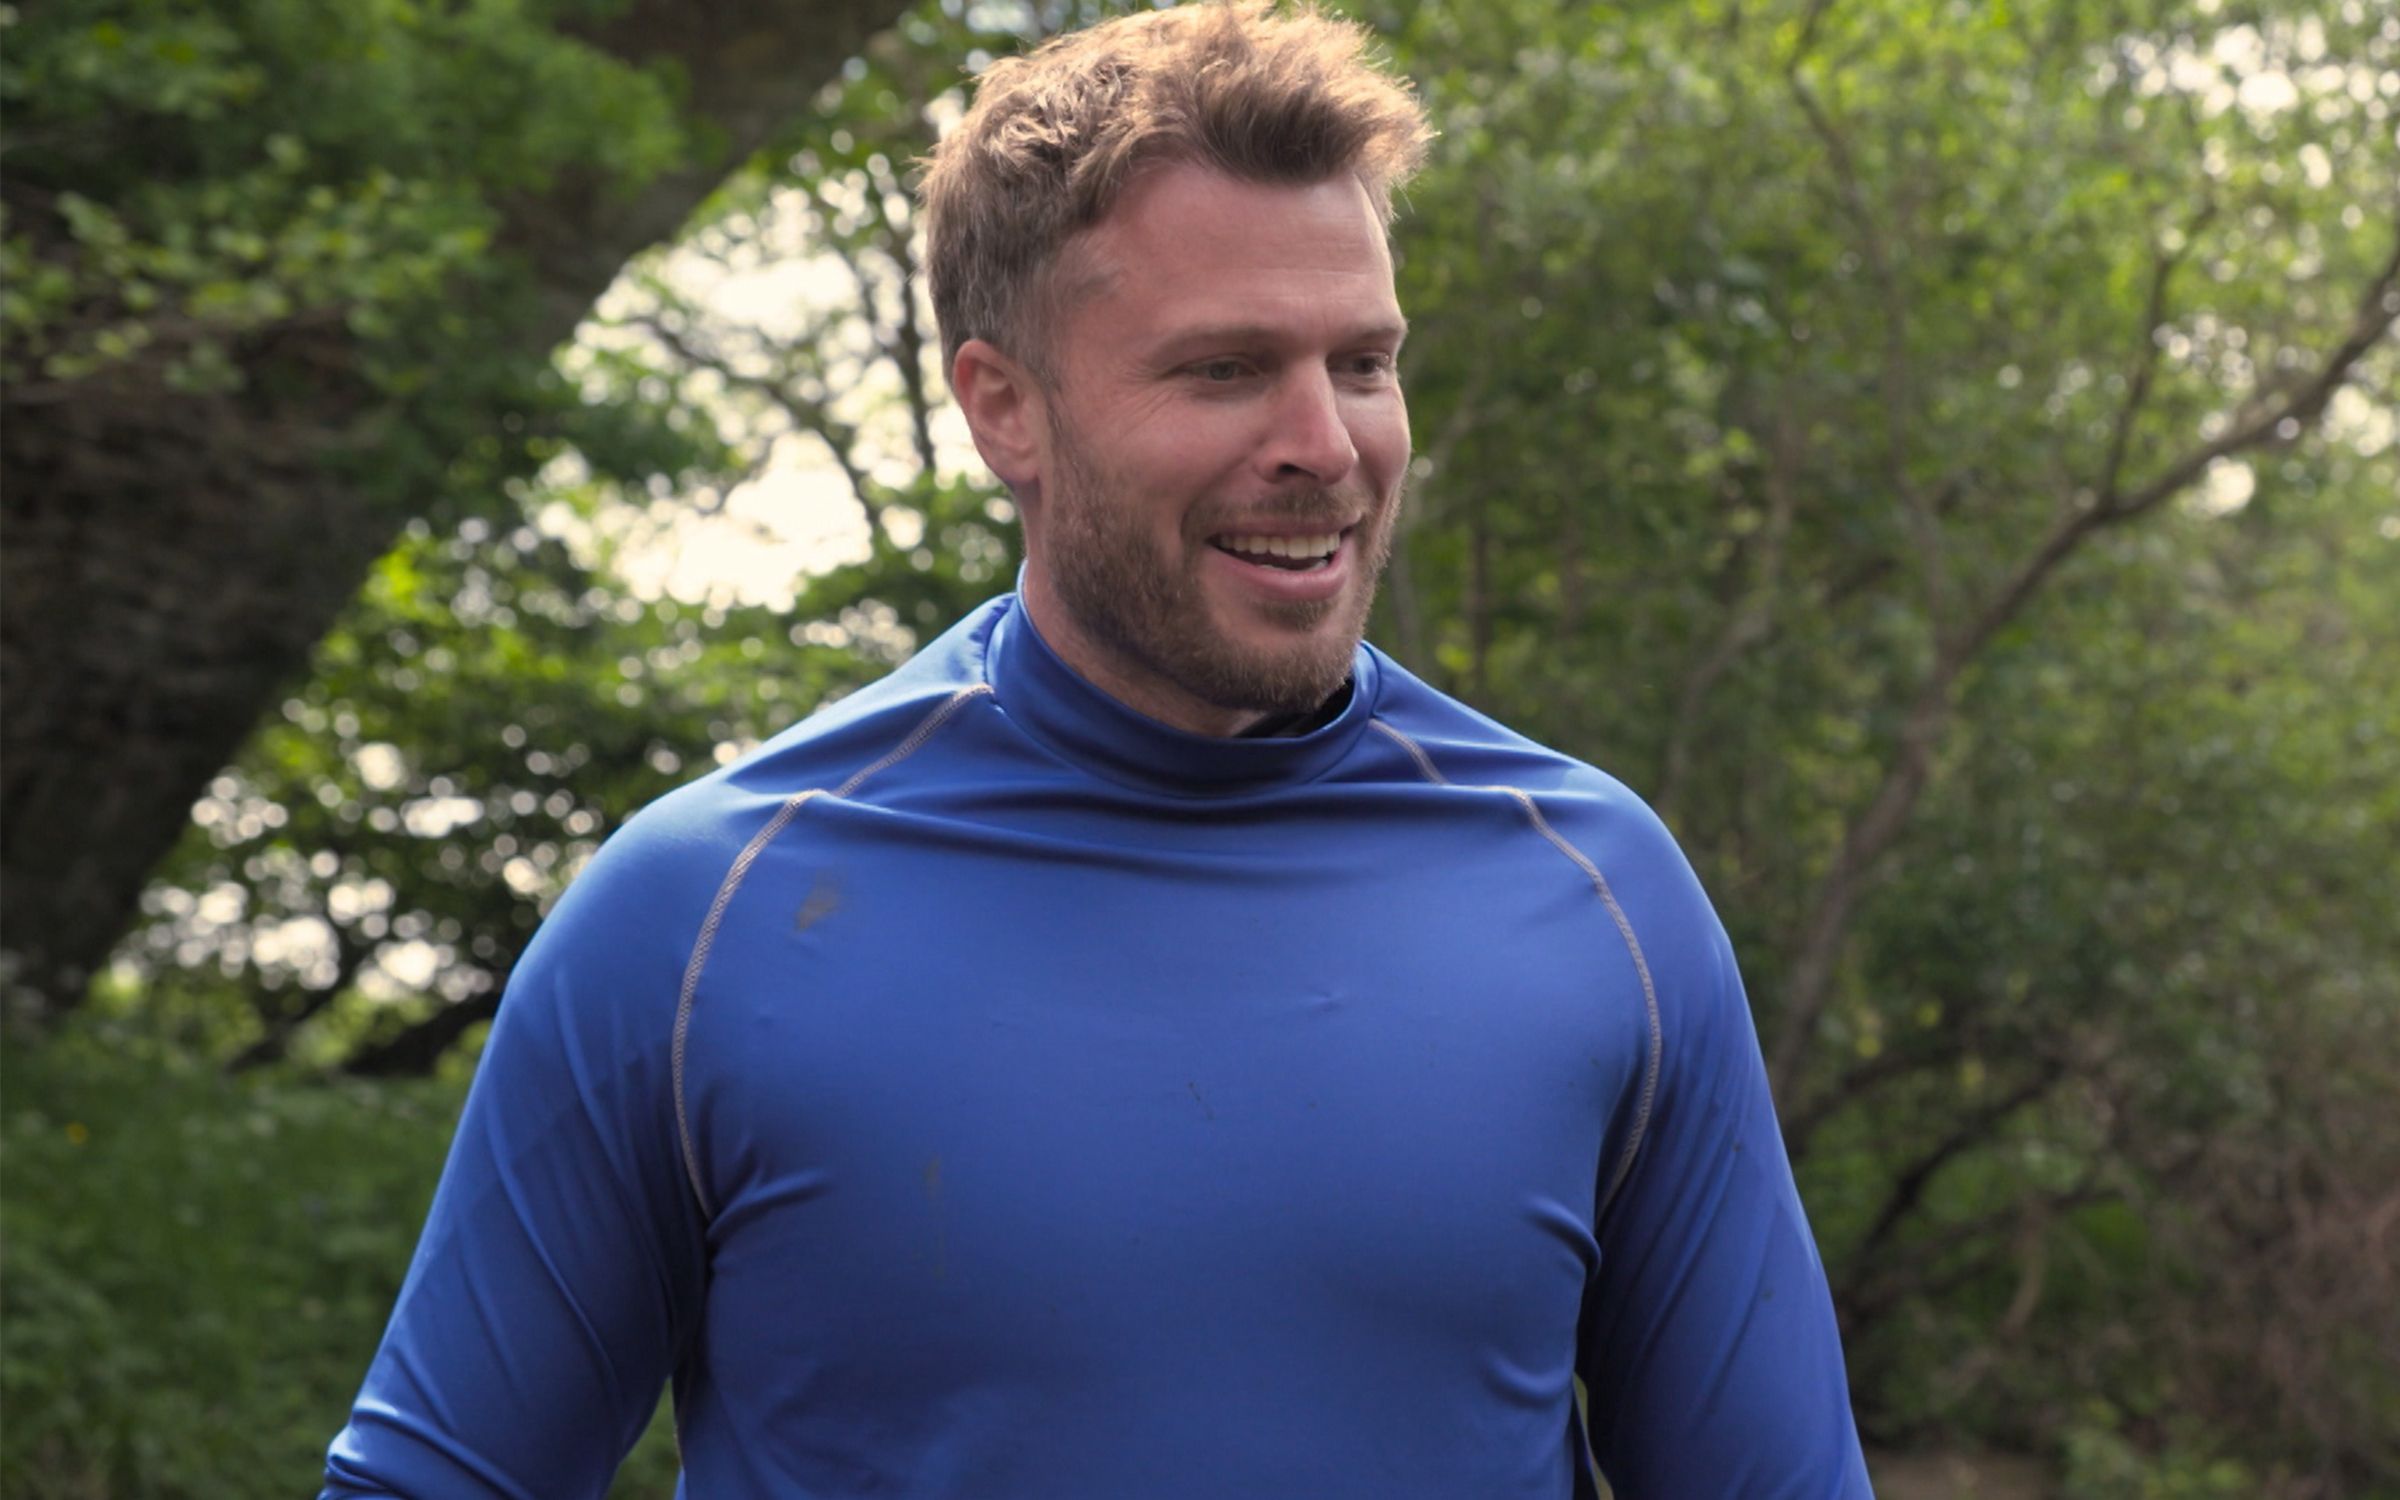 Rick Edwards on a run in the park